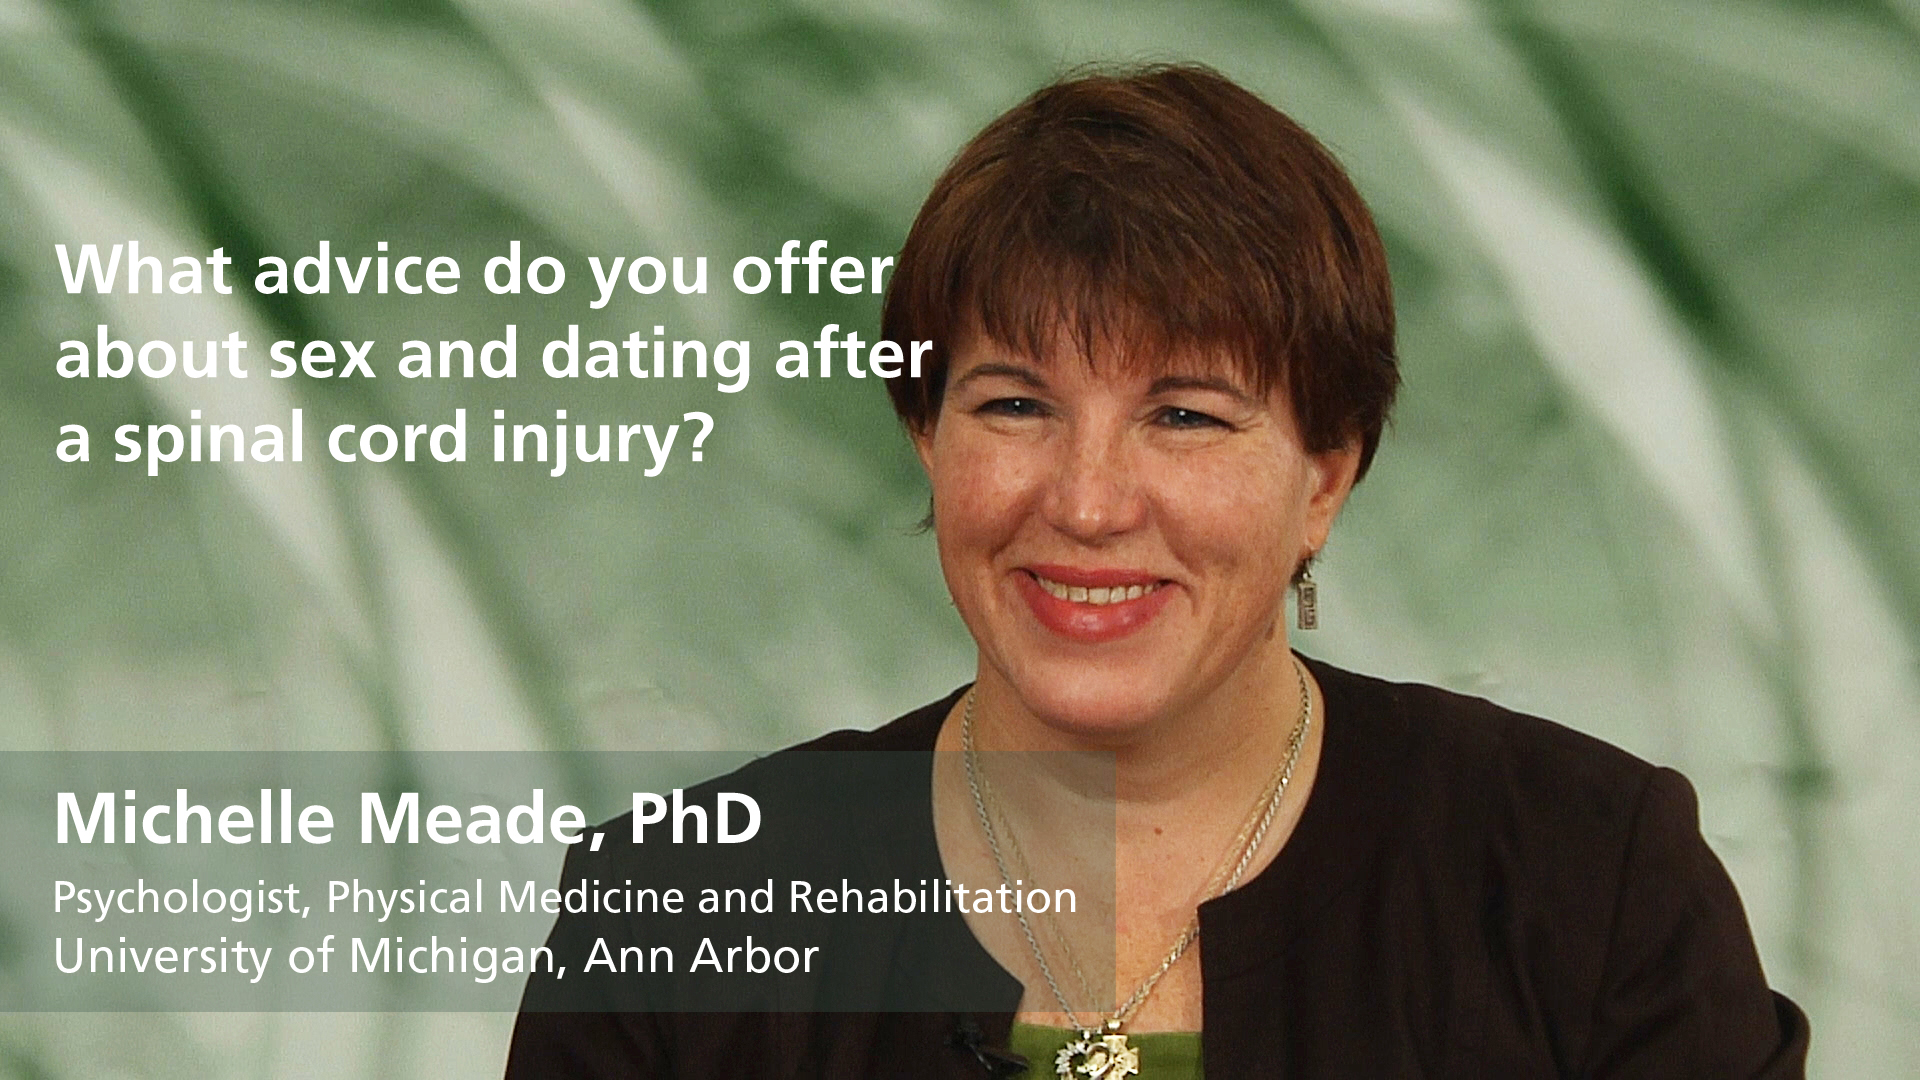 Pins showing dating can be positive and successful after a spinal cord injury.